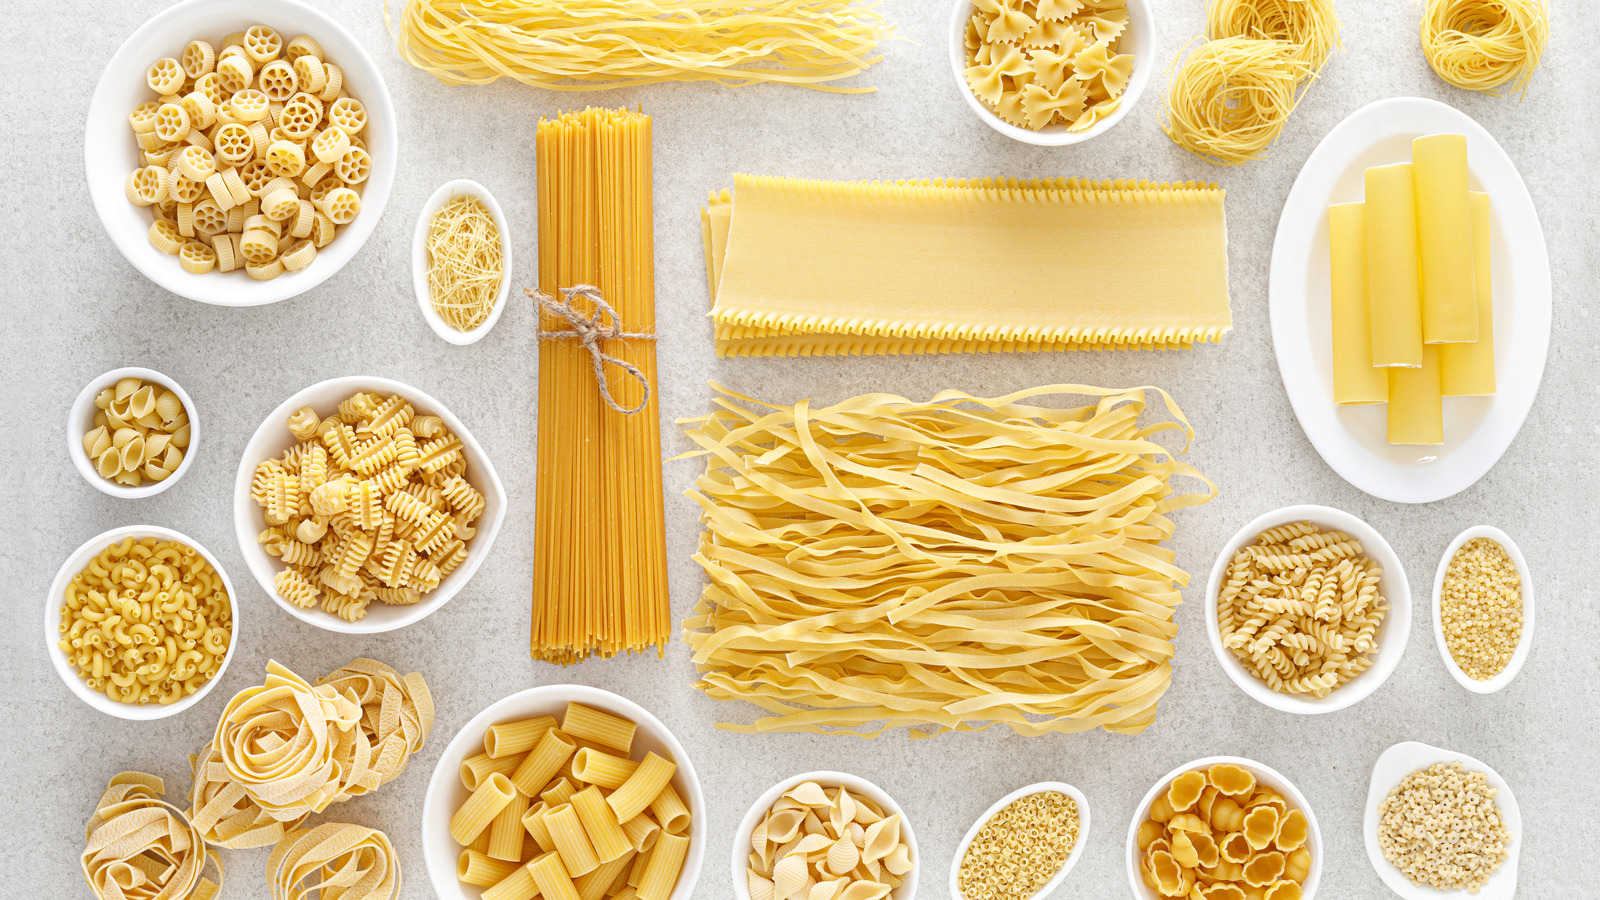 Choose right for your type: pasta shapes and their sauce